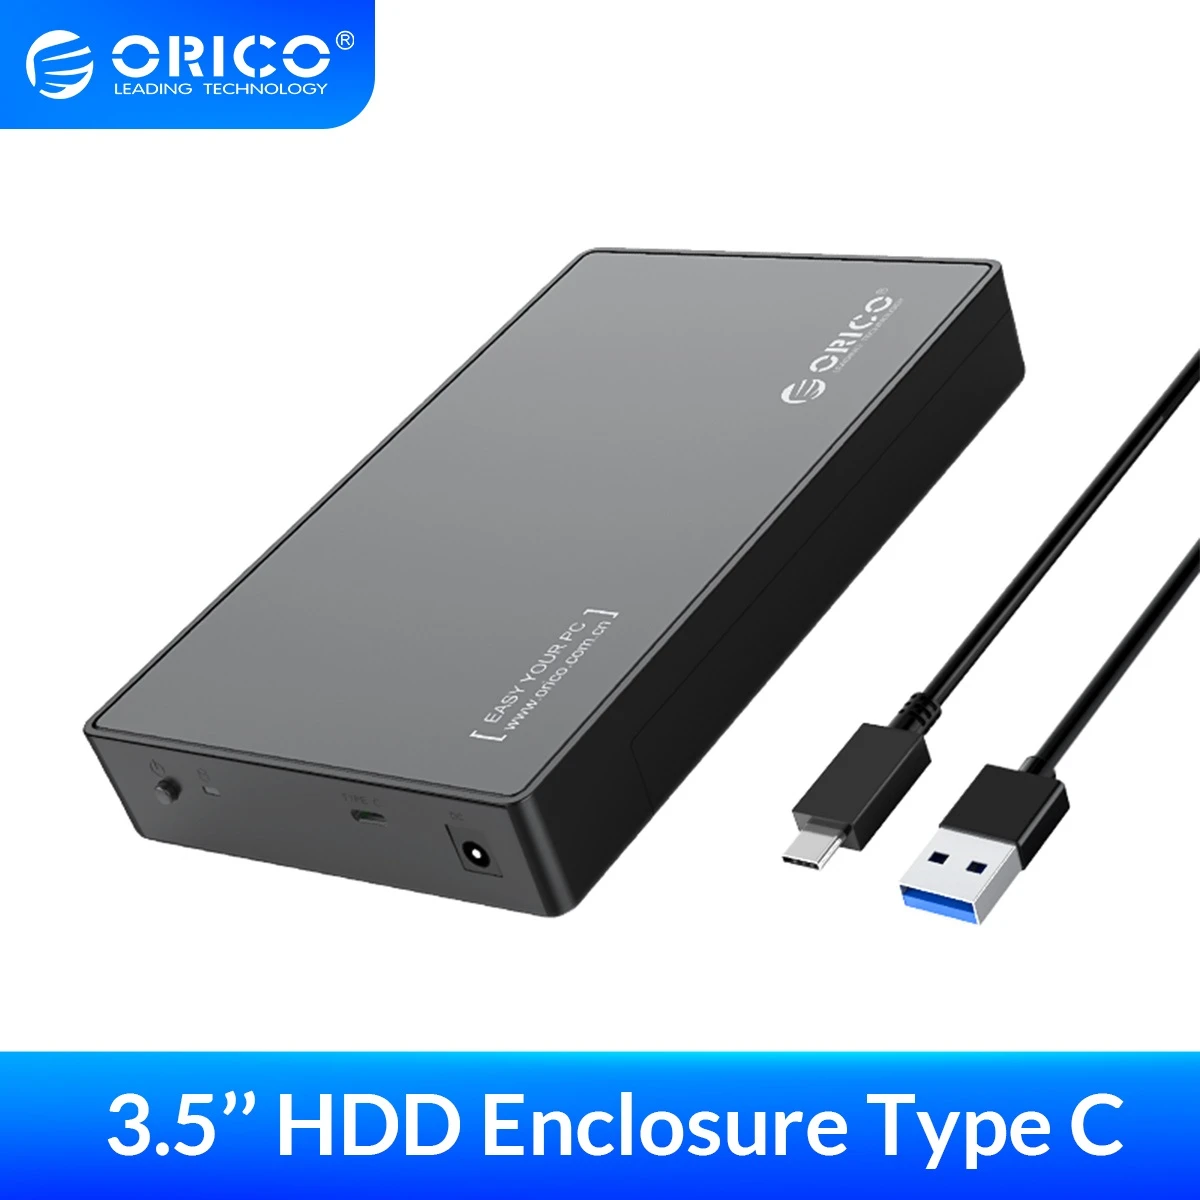 3.5 inch external hard drive enclosure ORICO 3.5'' HDD Case Type C SATA to USB3.0 External Hard Drive Enclosure for 2.5/3.5inch SSD Disk HDD Box Case Support UASP 18TB 3.5 inch hdd enclosure HDD Box Enclosures